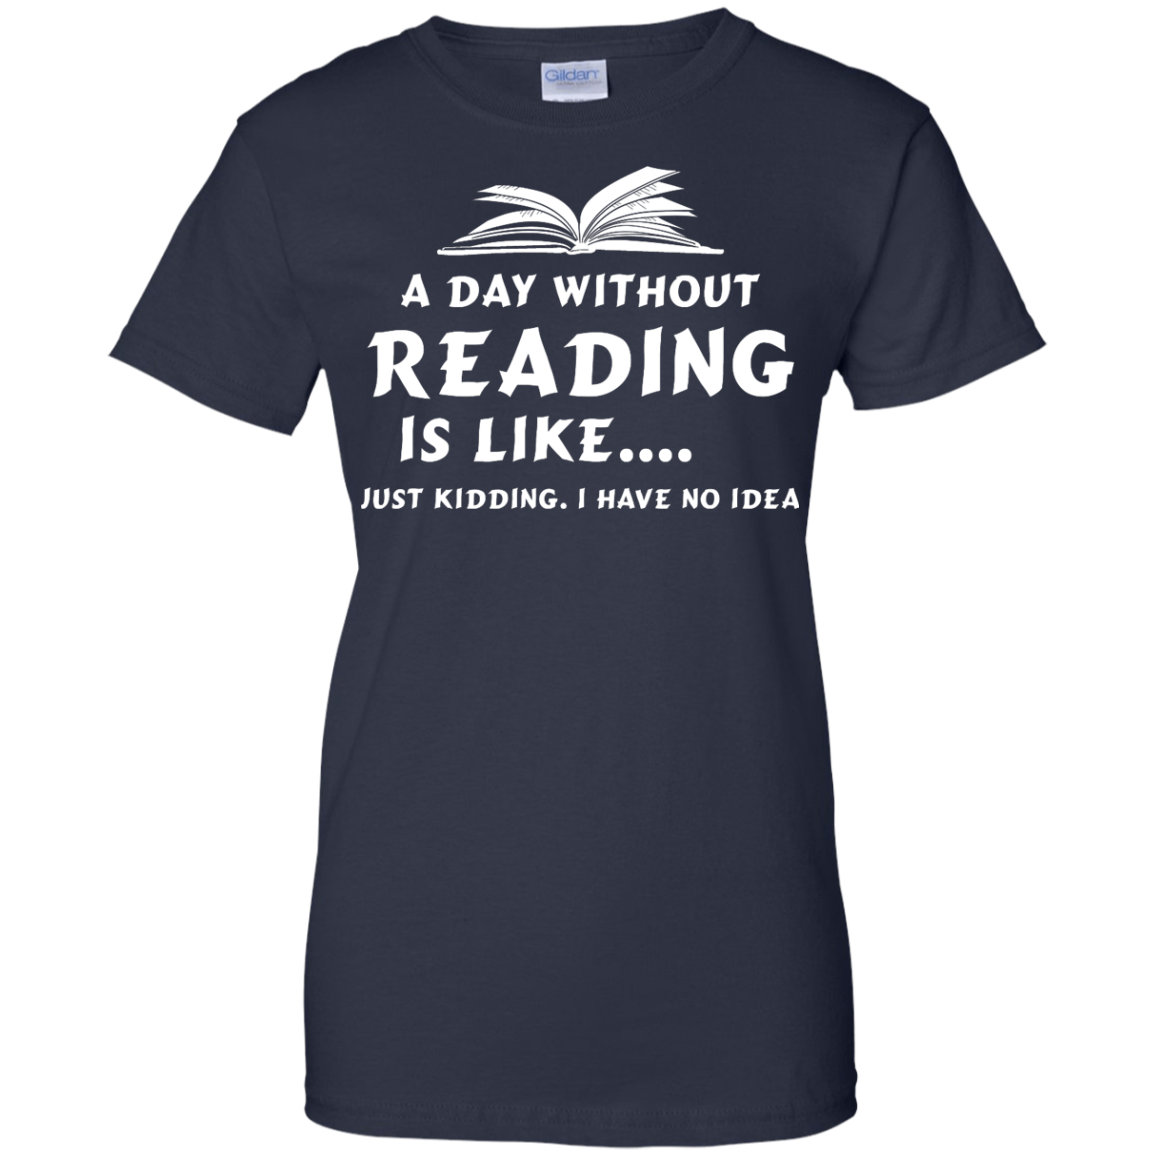 A day without reading is like, justkidding i have no dea T-shirt,Tank ...